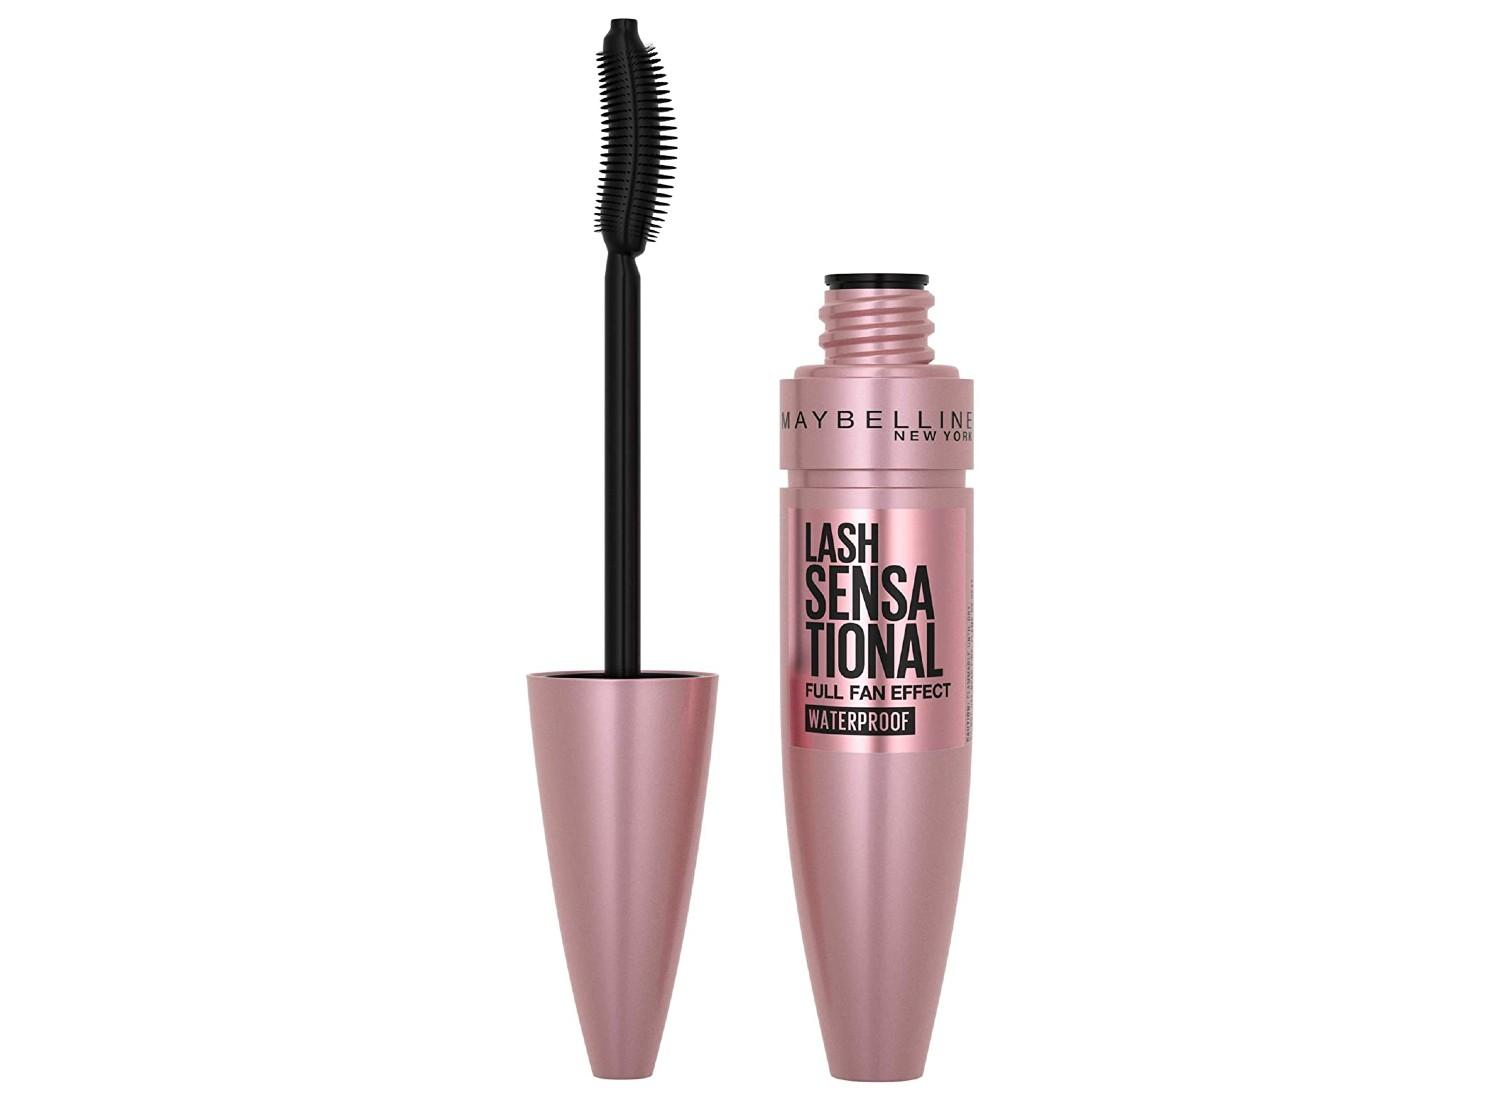 An open Maybelline mascara bottle and applicator.